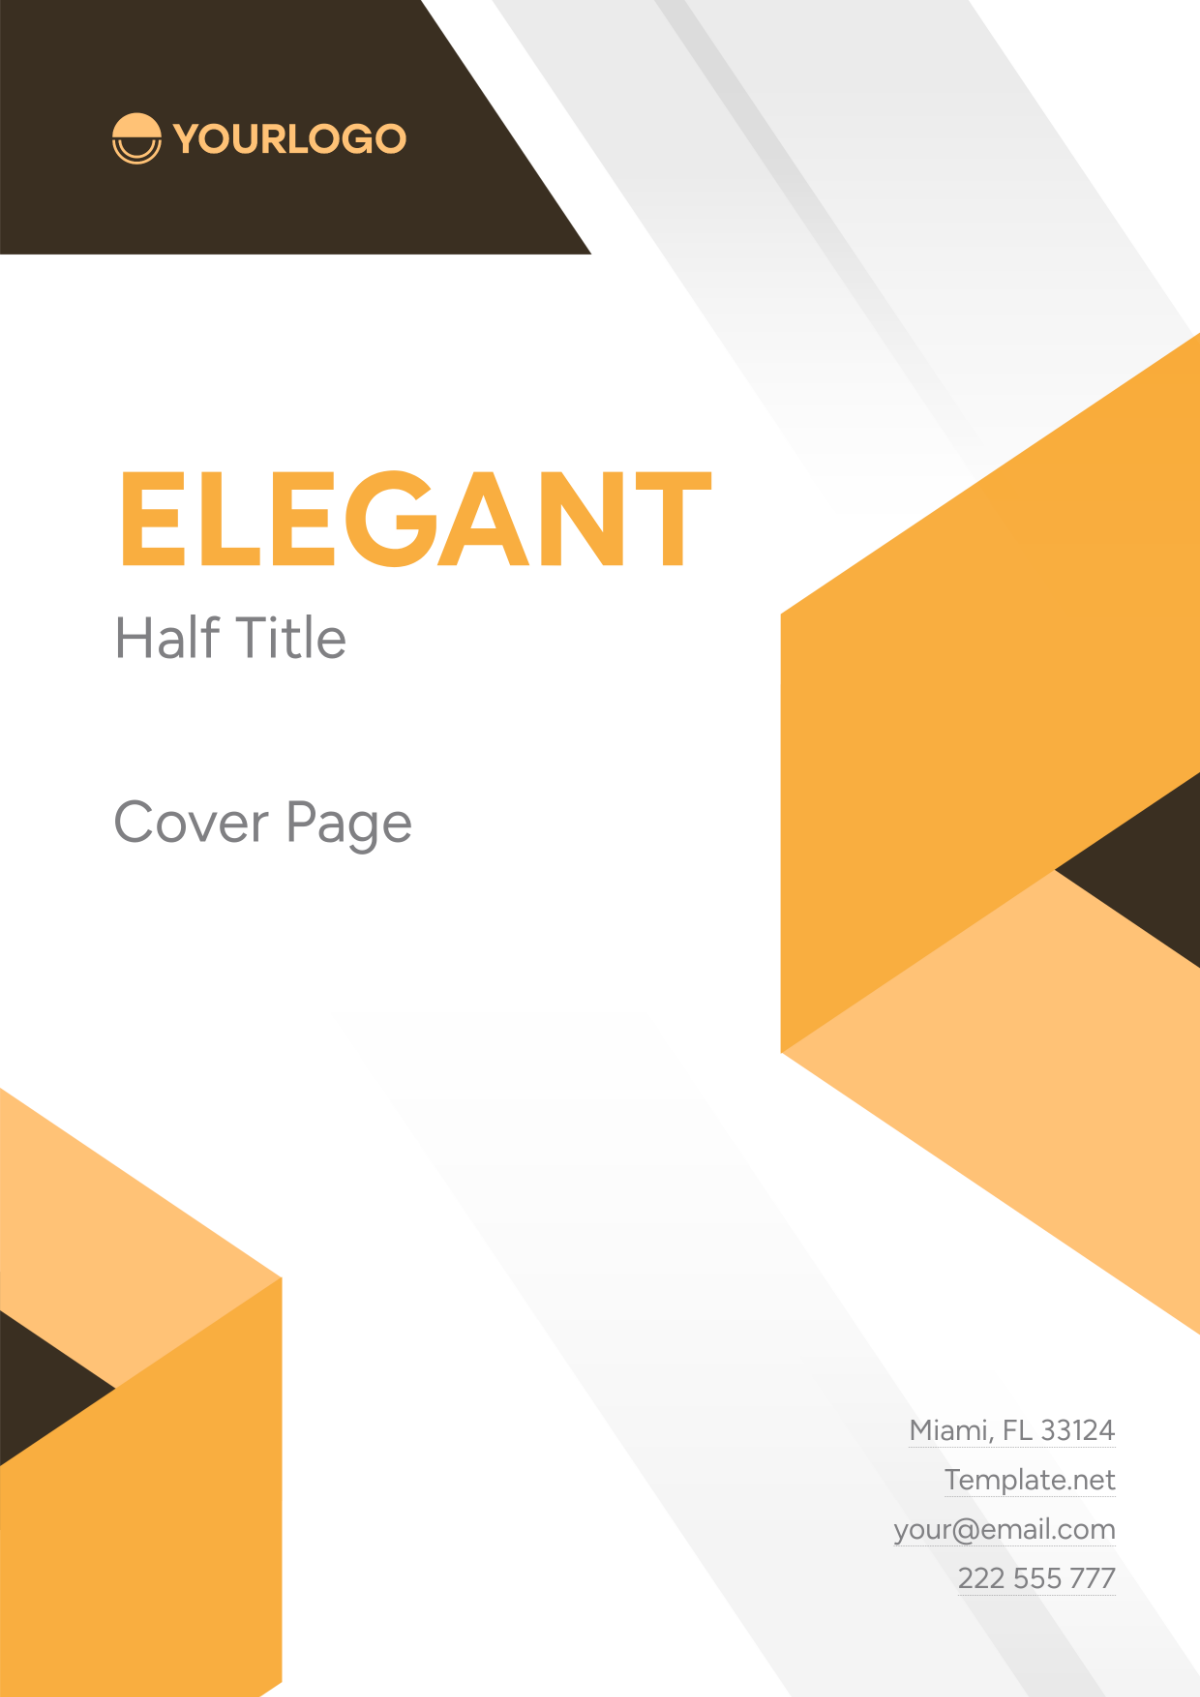 Elegant Half Title Cover Page Template